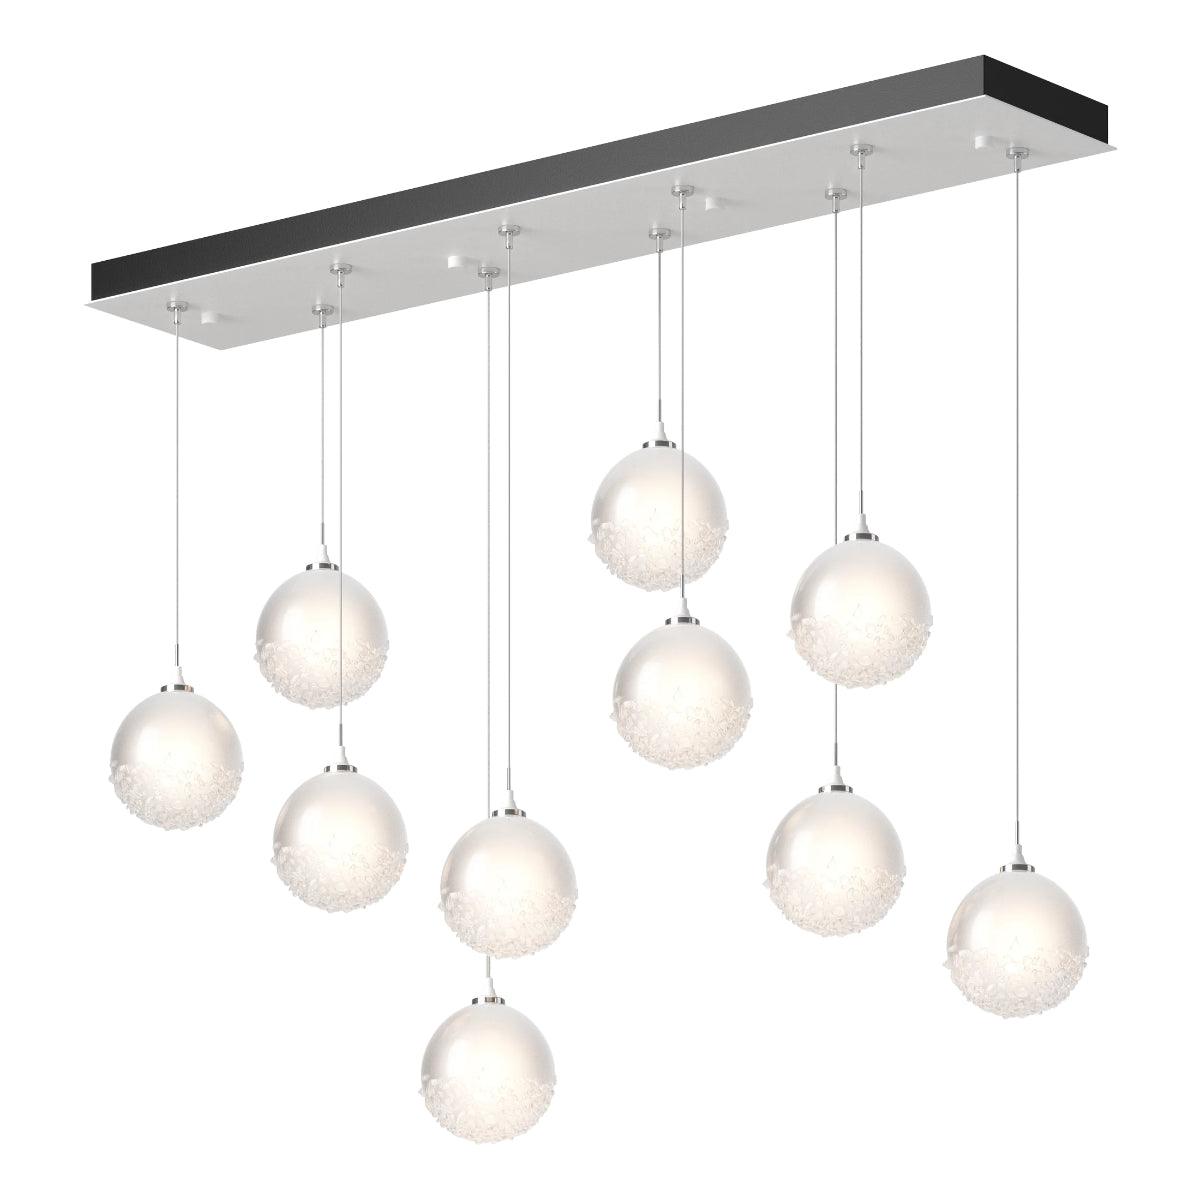 Fritz 45 in. 10 lights Linear Pendant Light with Long Height - Bees Lighting